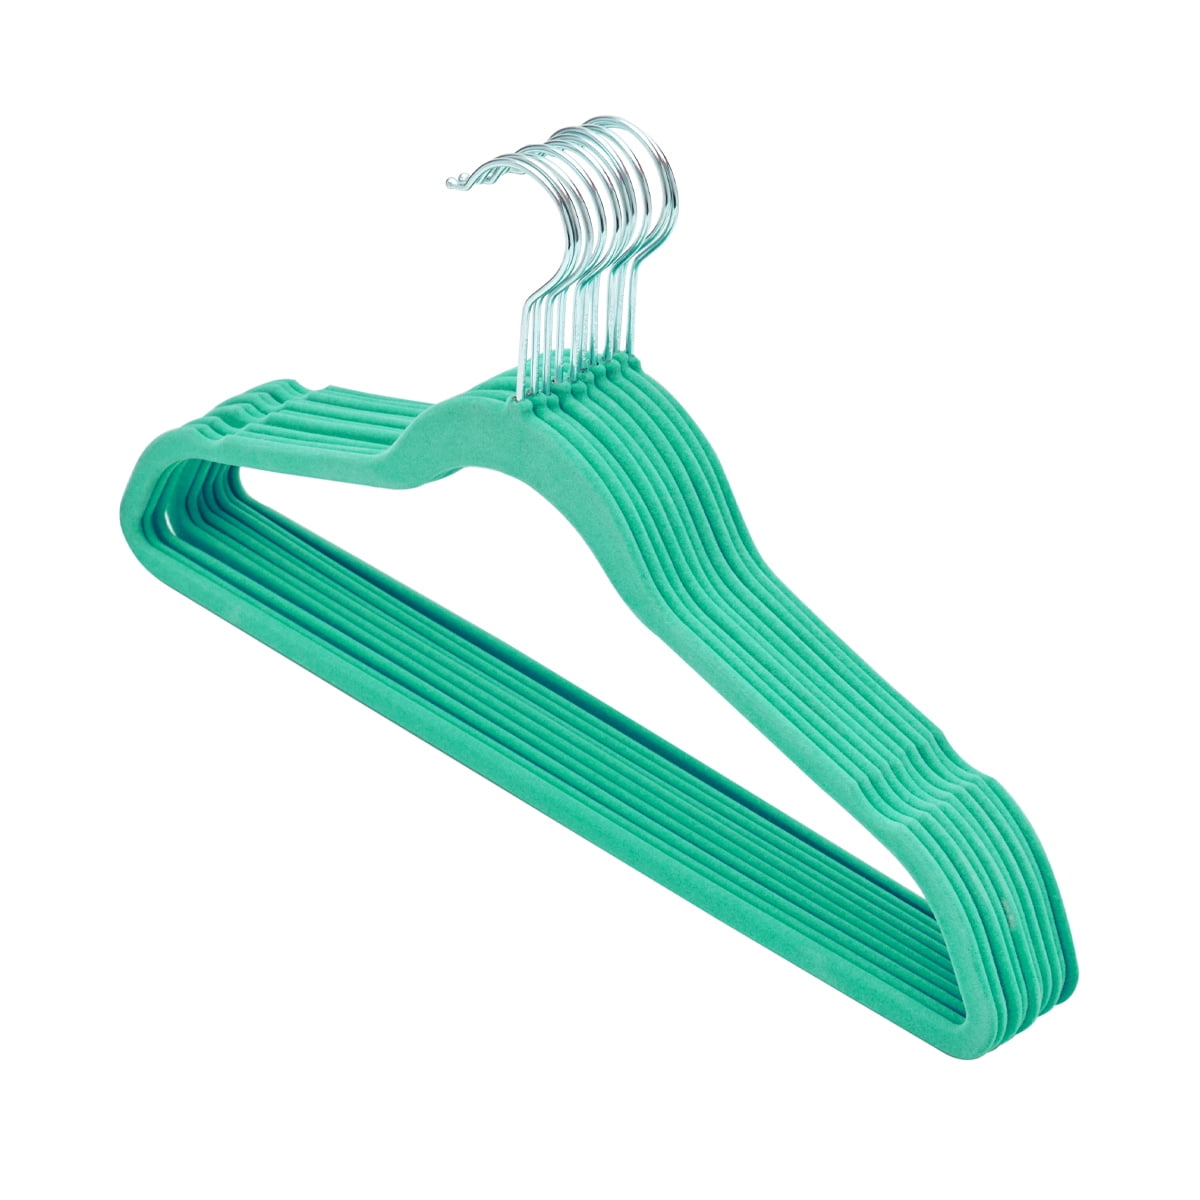 Plastic Clothes Hangers Seafoam Green 2 Count With Shoulder String Hooks  16.5 in